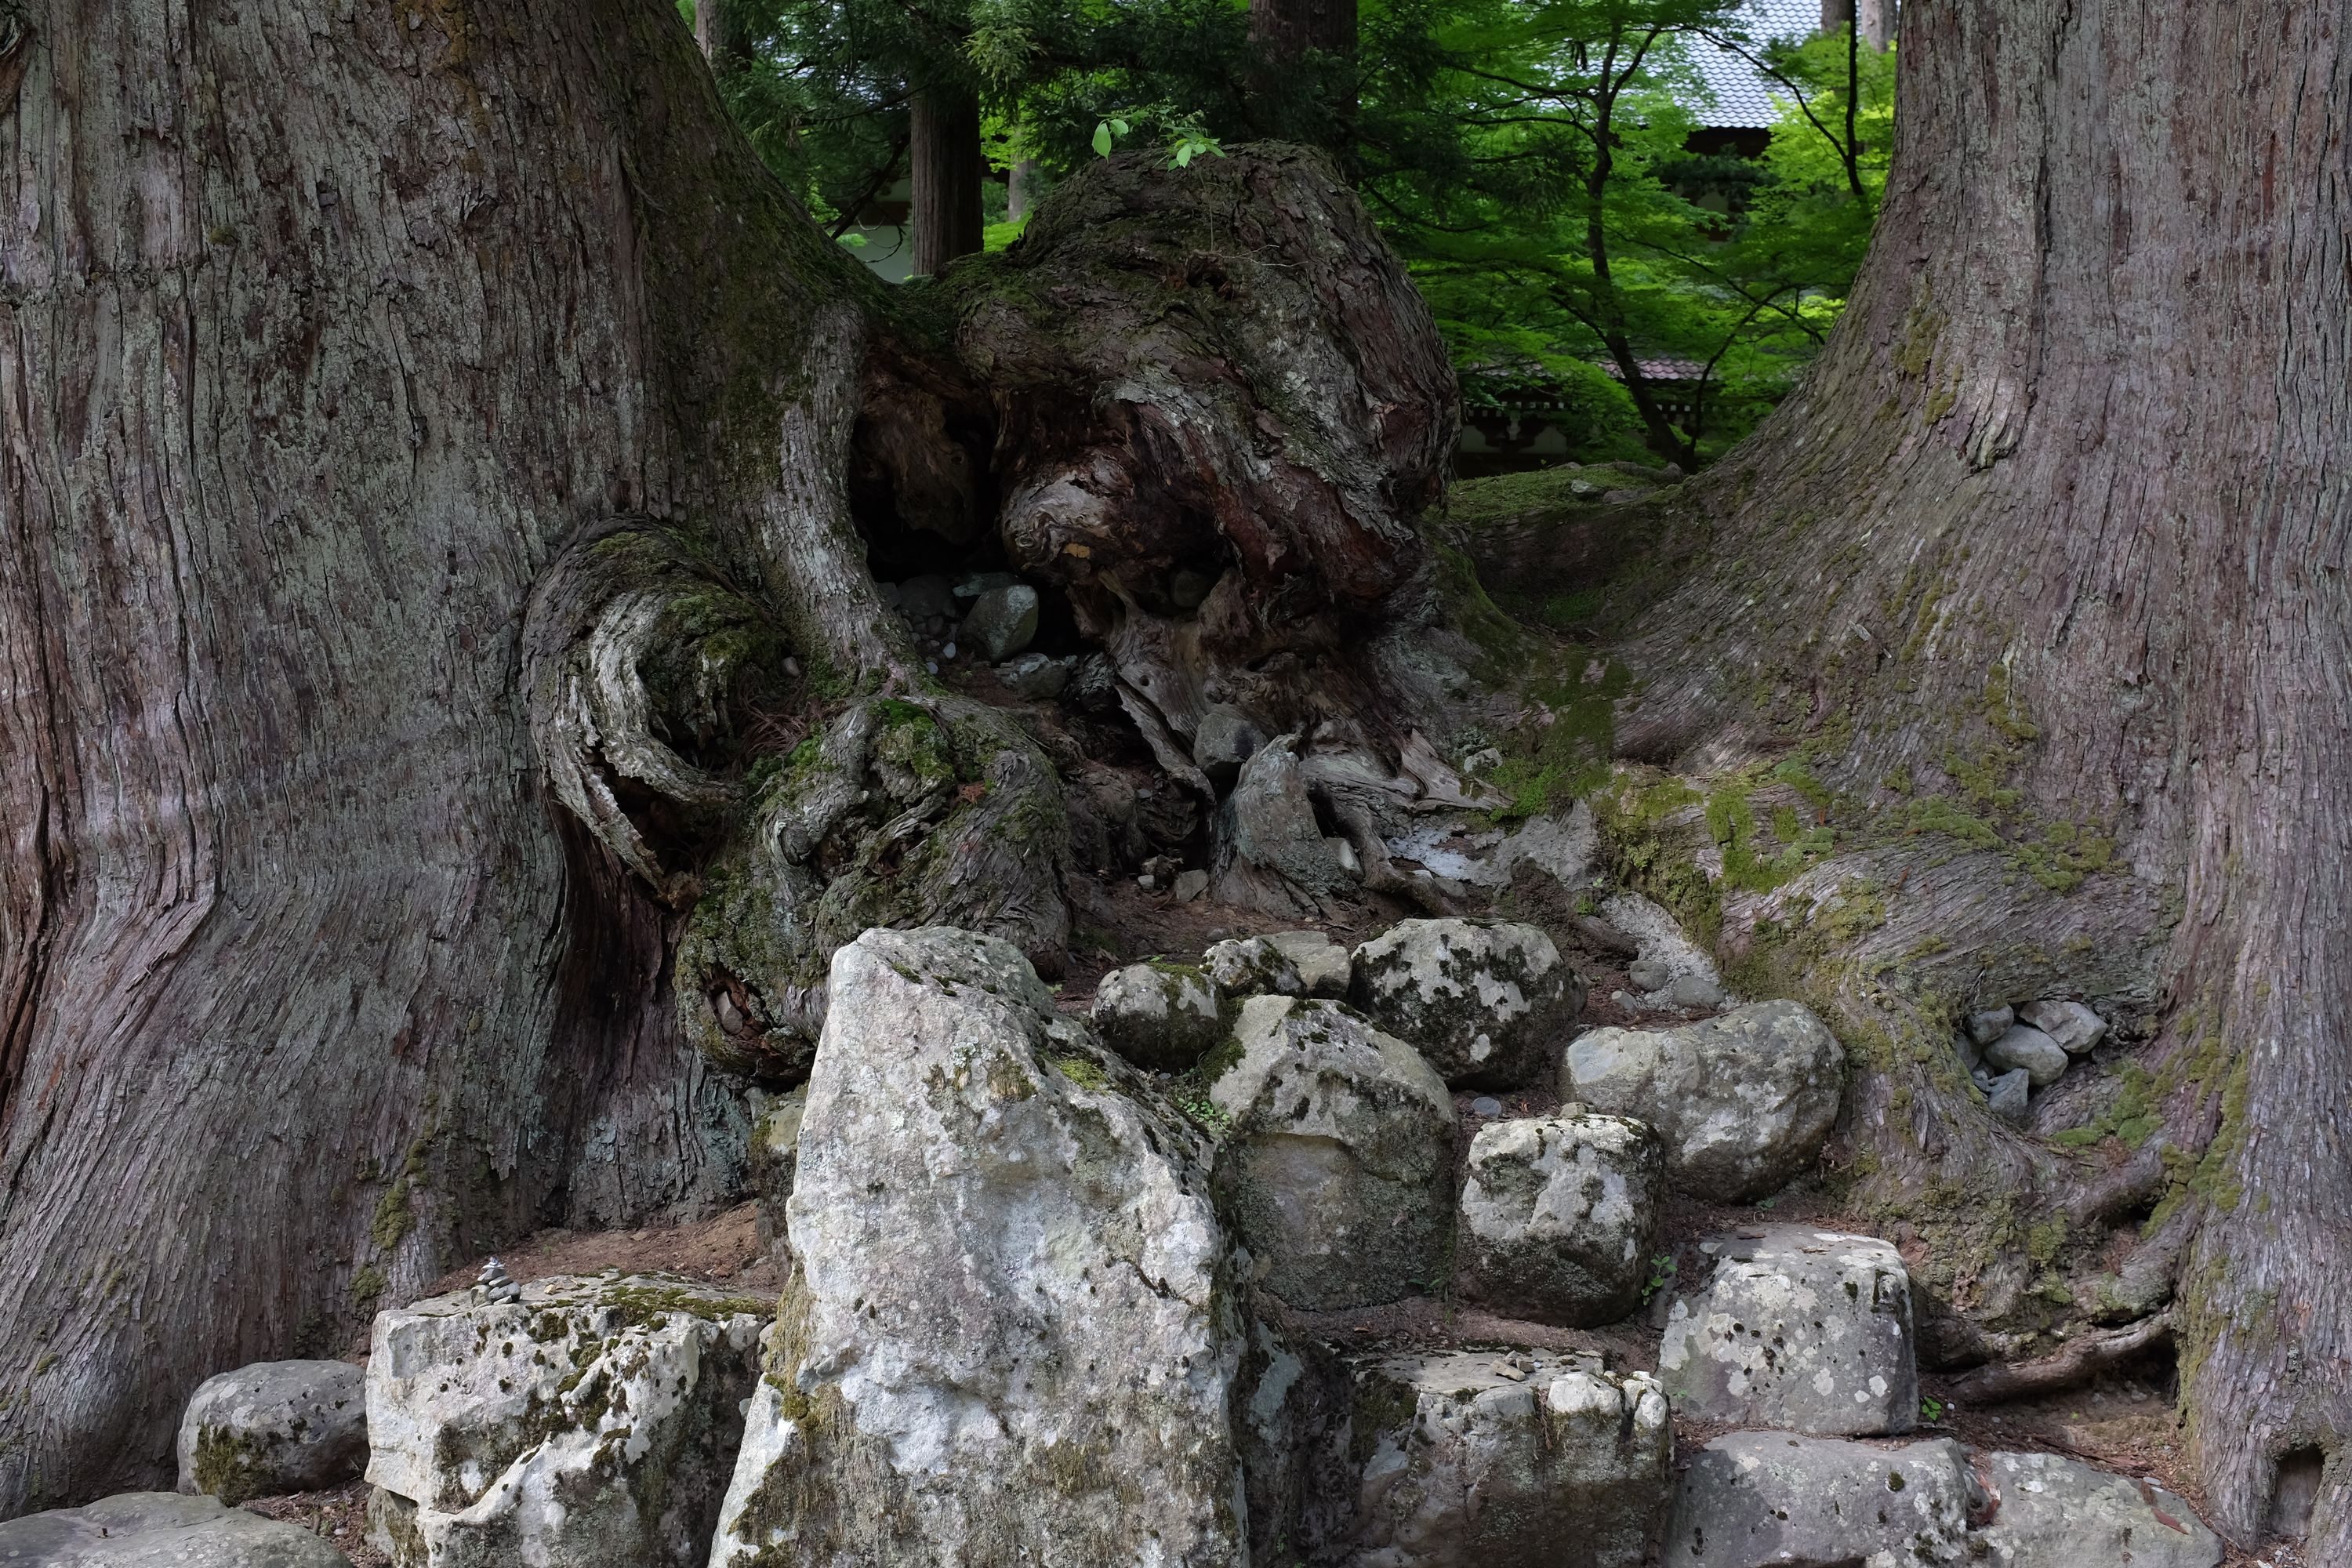 A rocky path between the trunks of two big trees, with the roof of a Japanese building behind them.